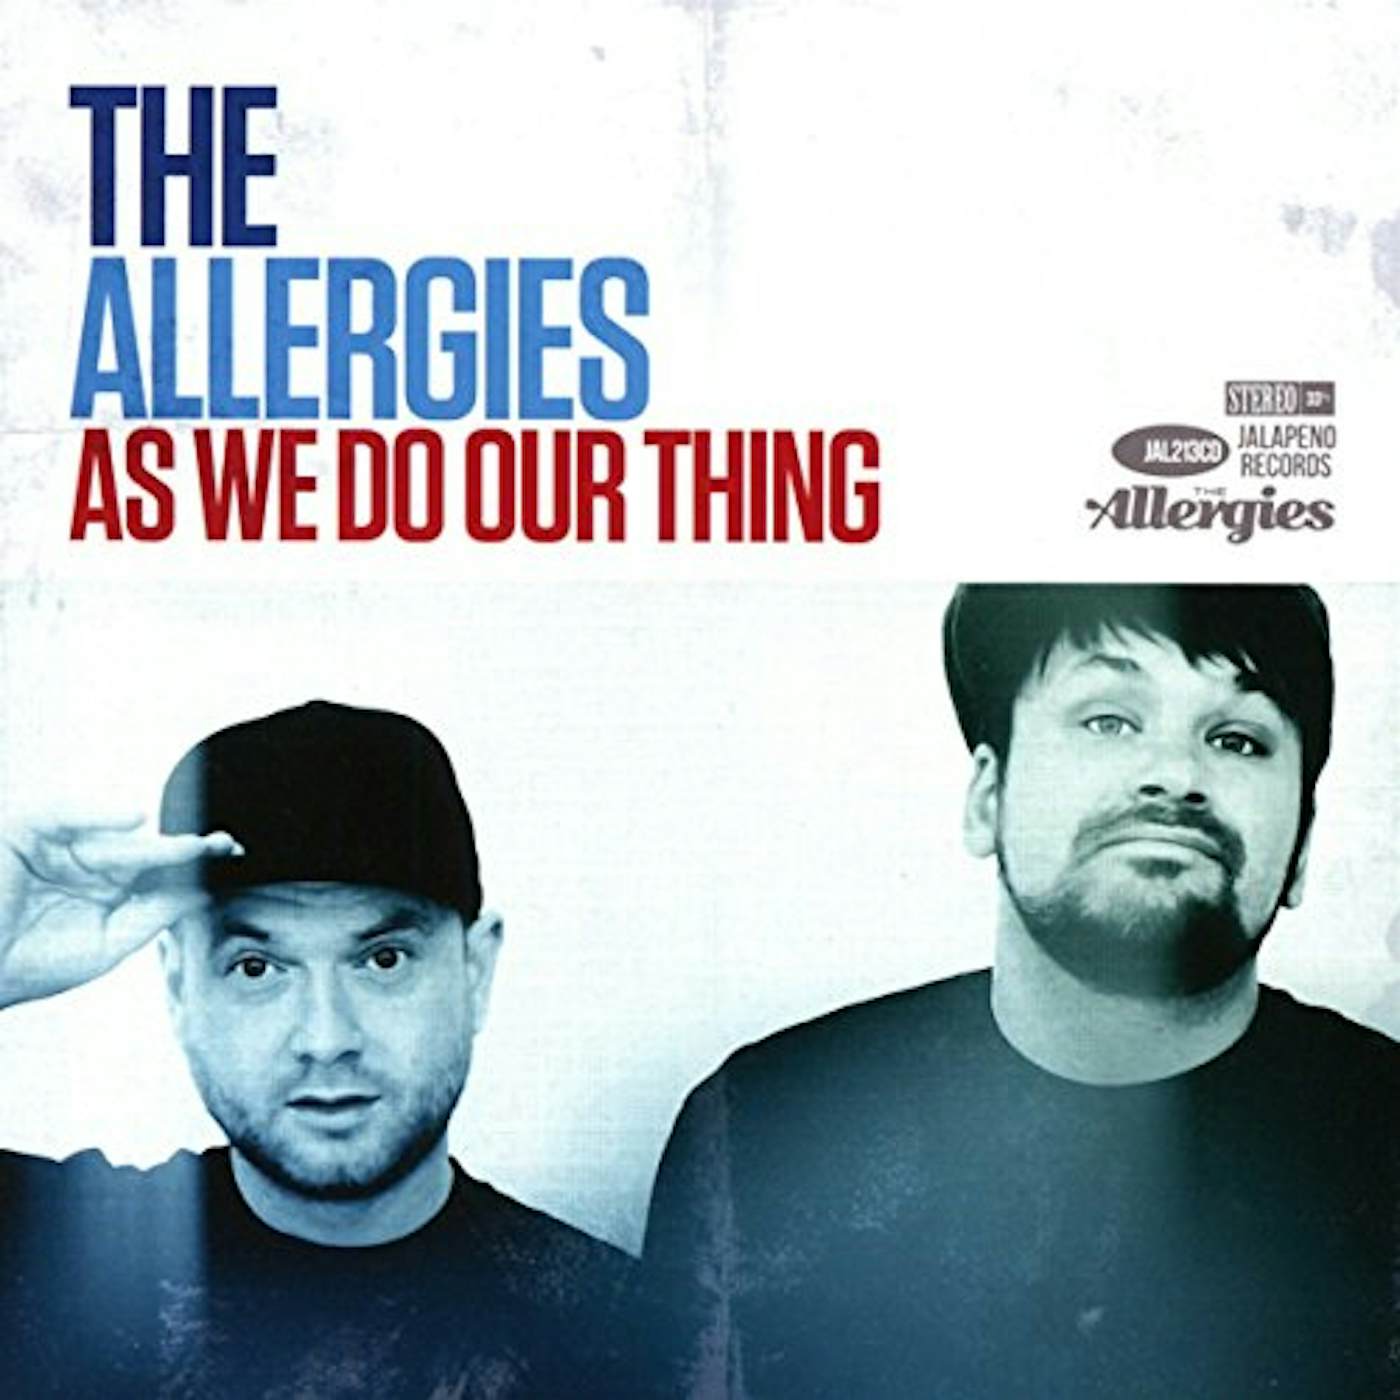 The Allergies AS WE DO OUR THING CD